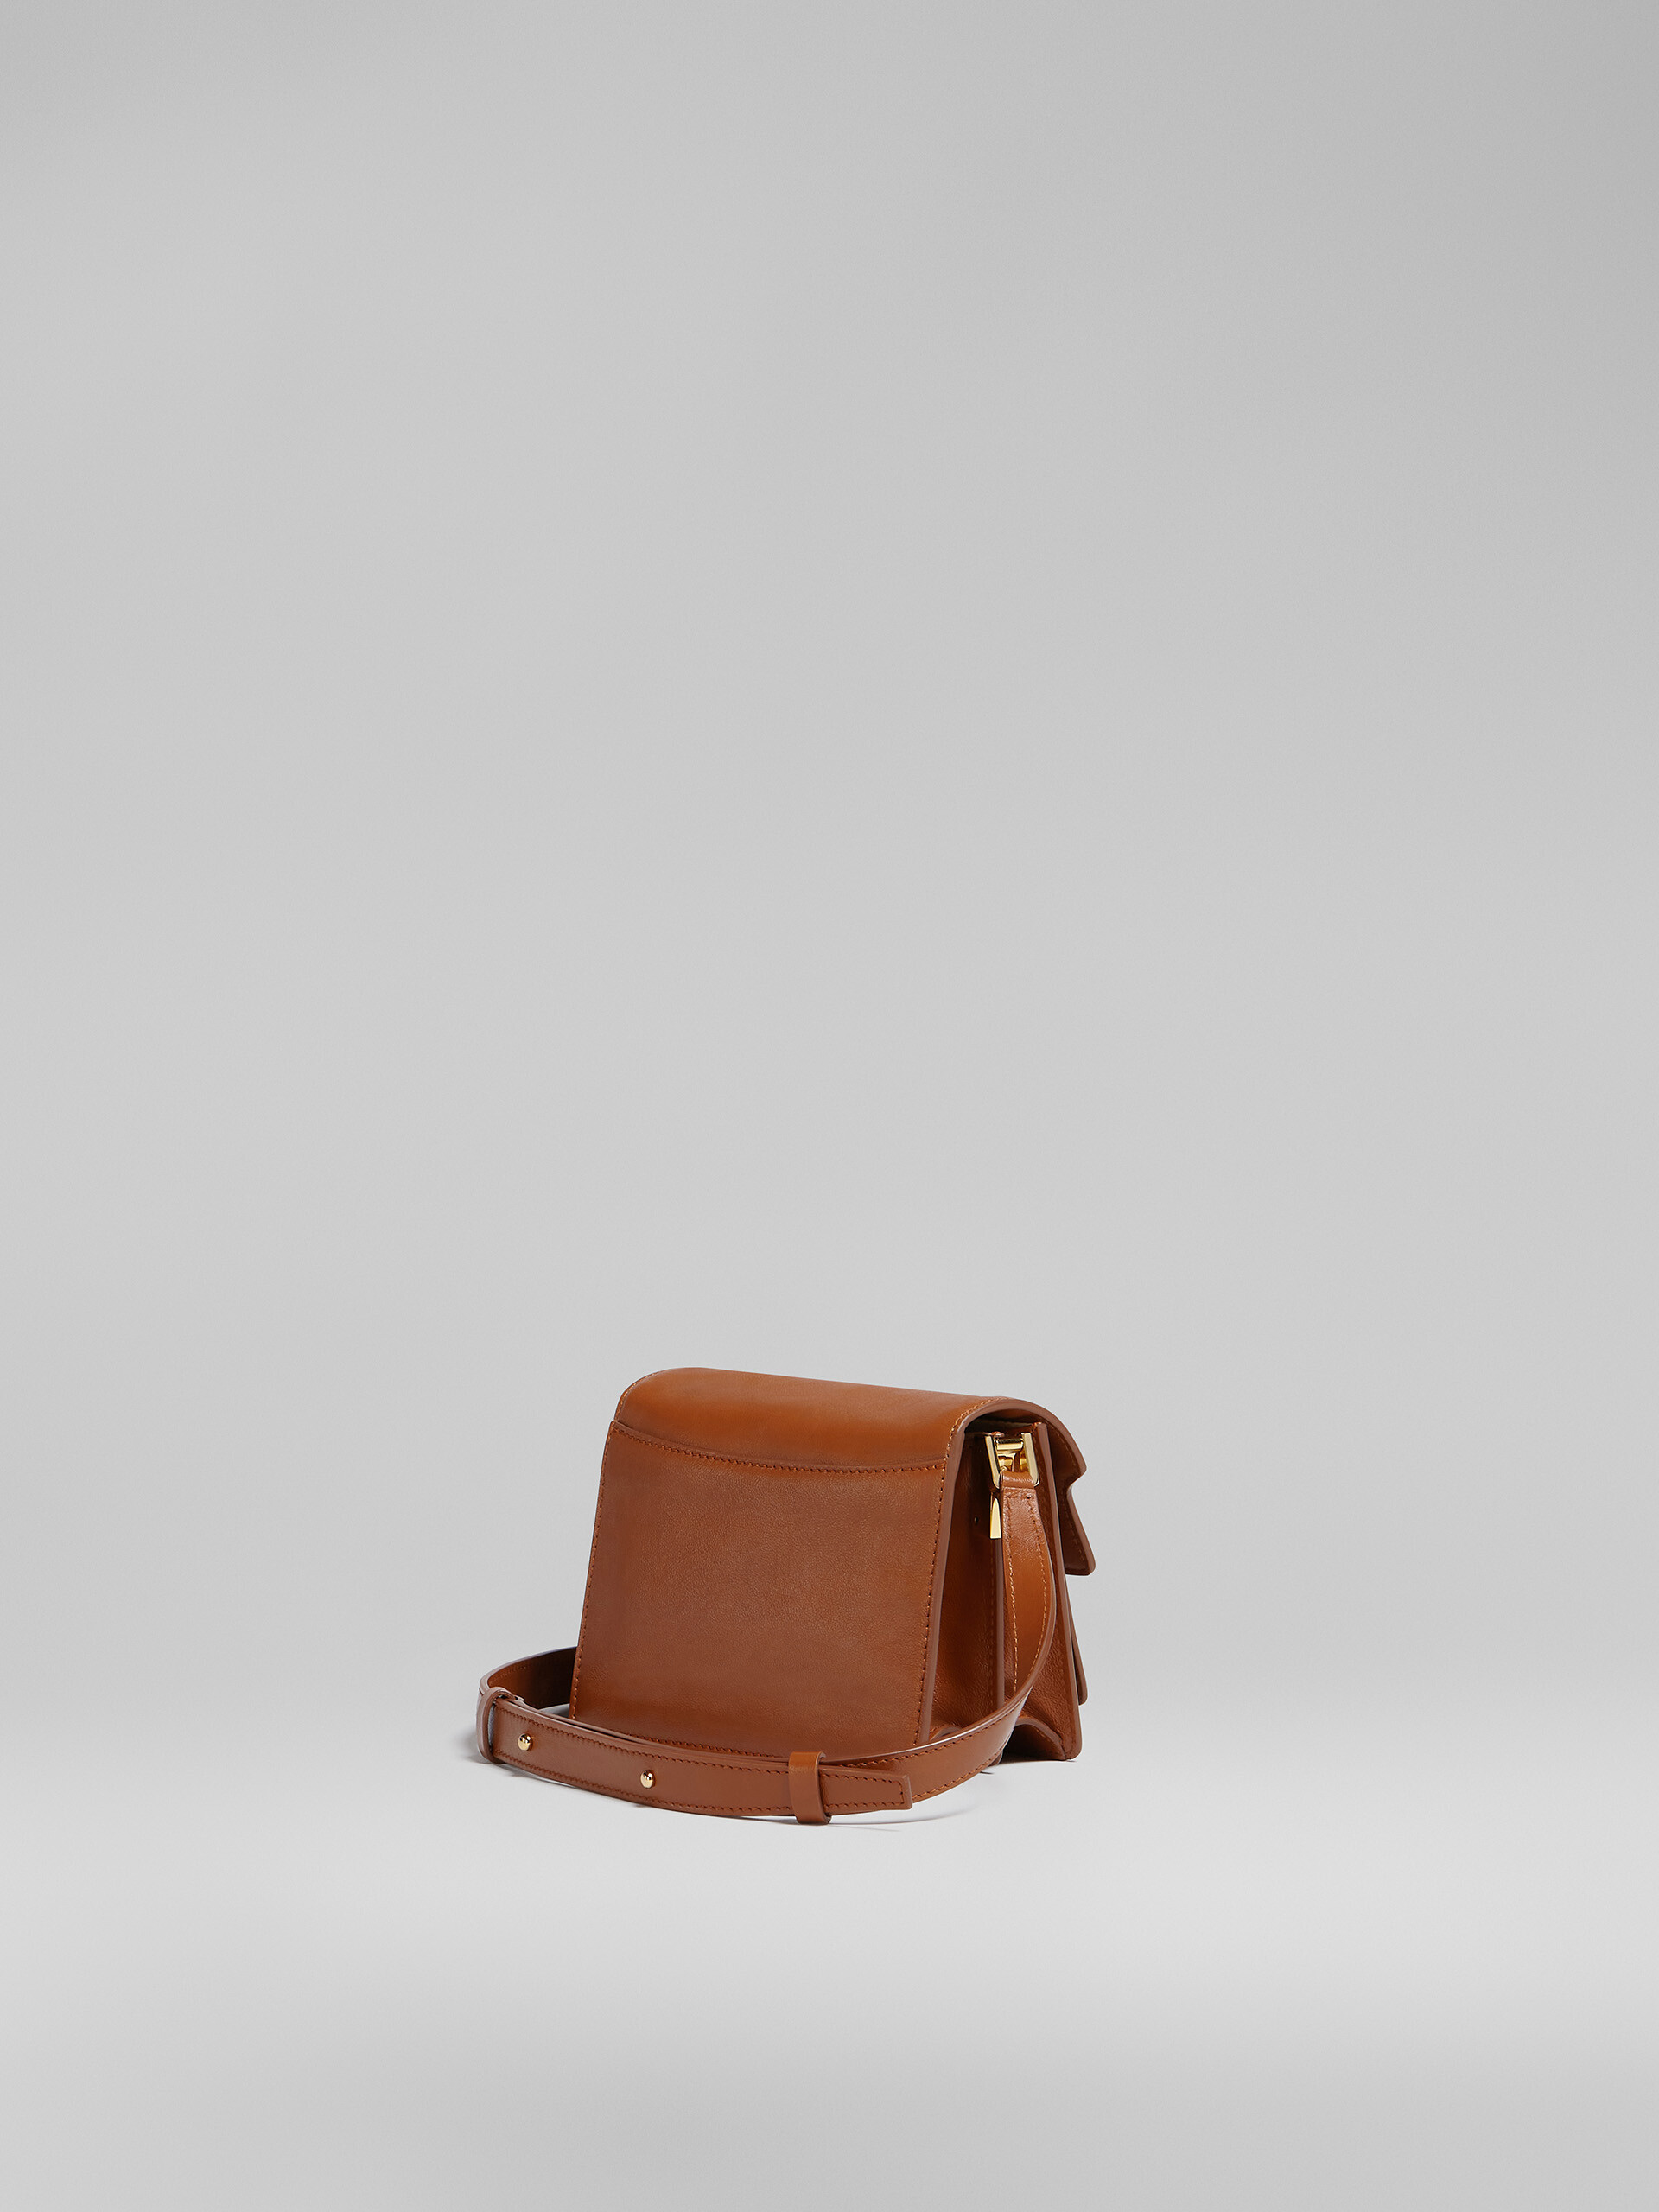 TRUNK SOFT mini bag in brown leather - Shoulder Bags - Image 3